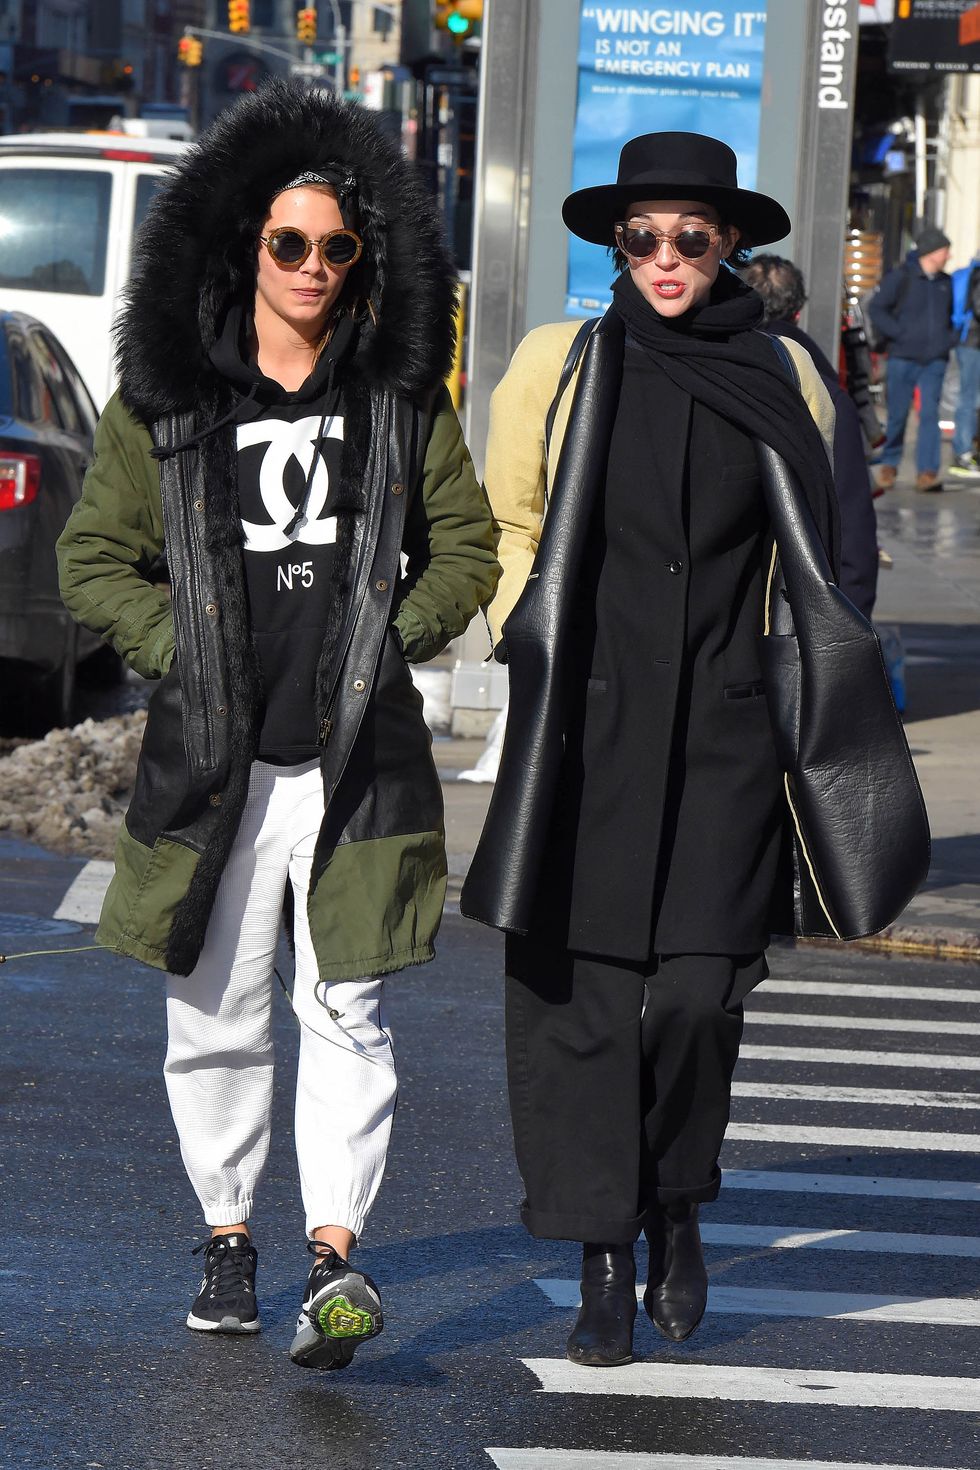 NEW YORK - MARCH 02, 2015: Cara Delevingne and rumoured girlfriend musician St. Vincent seen out in Soho on March 02, 2015 in New York, New York.  (Photo by Josiah Kamau/BuzzFoto via Getty Images)